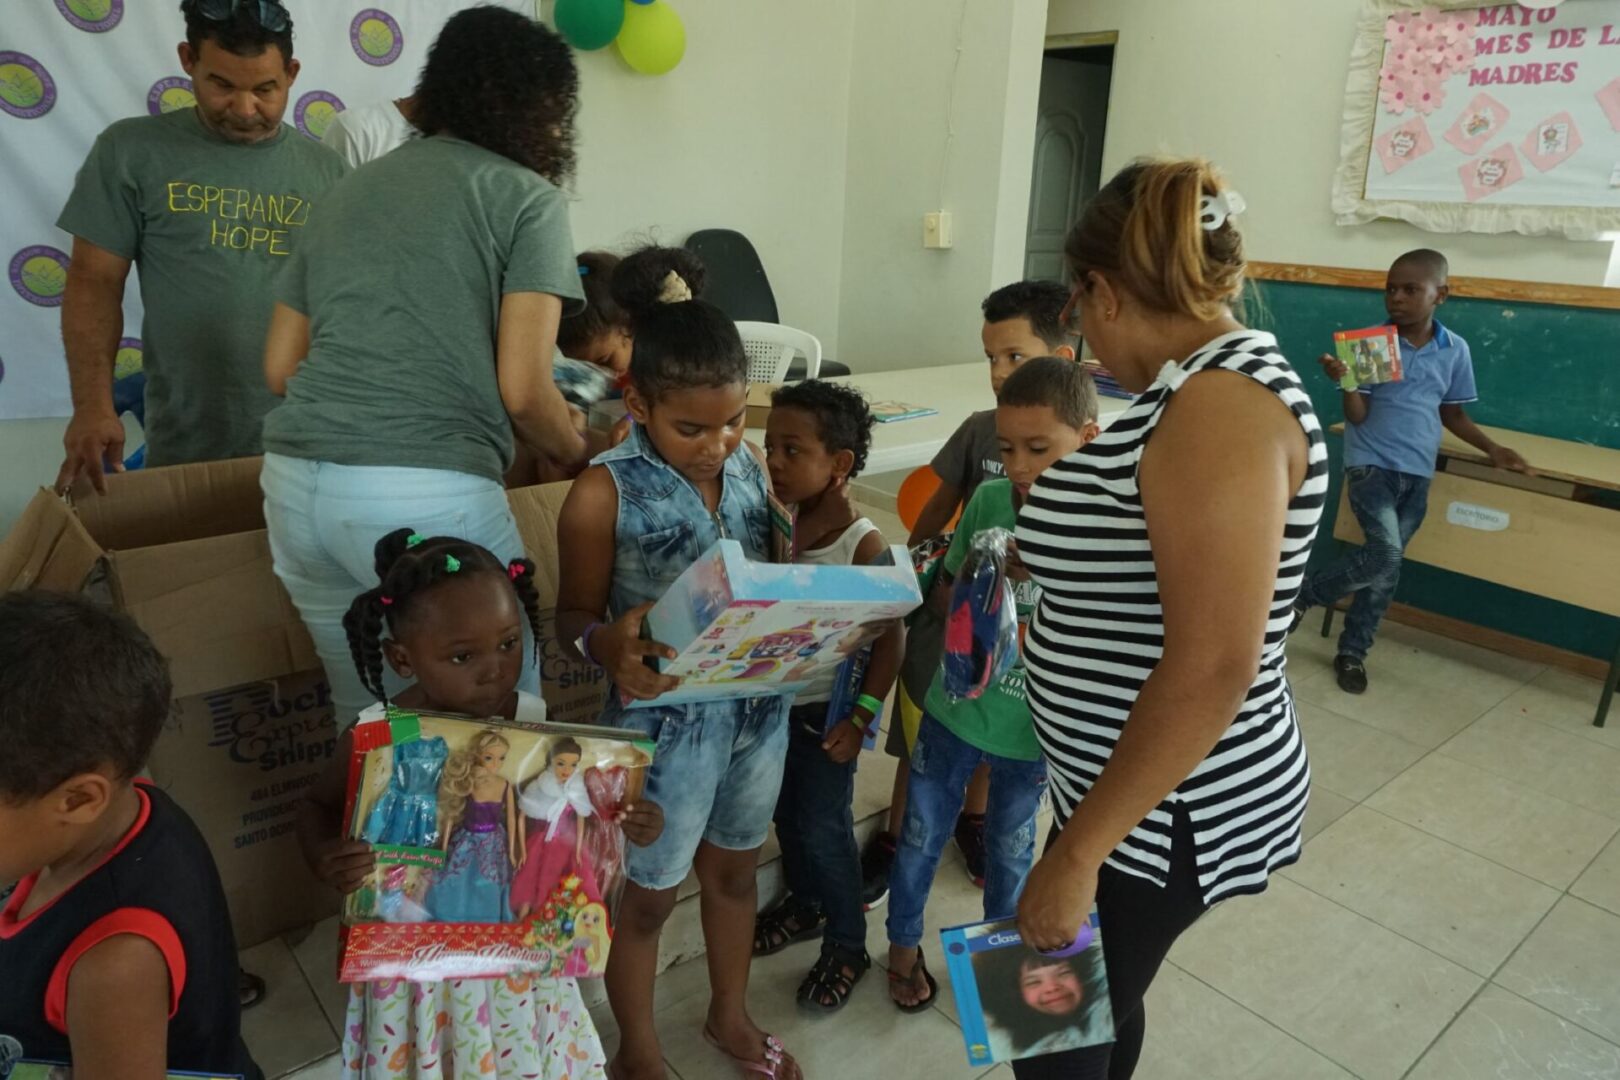 Staff working at the back and a group of children holding toys